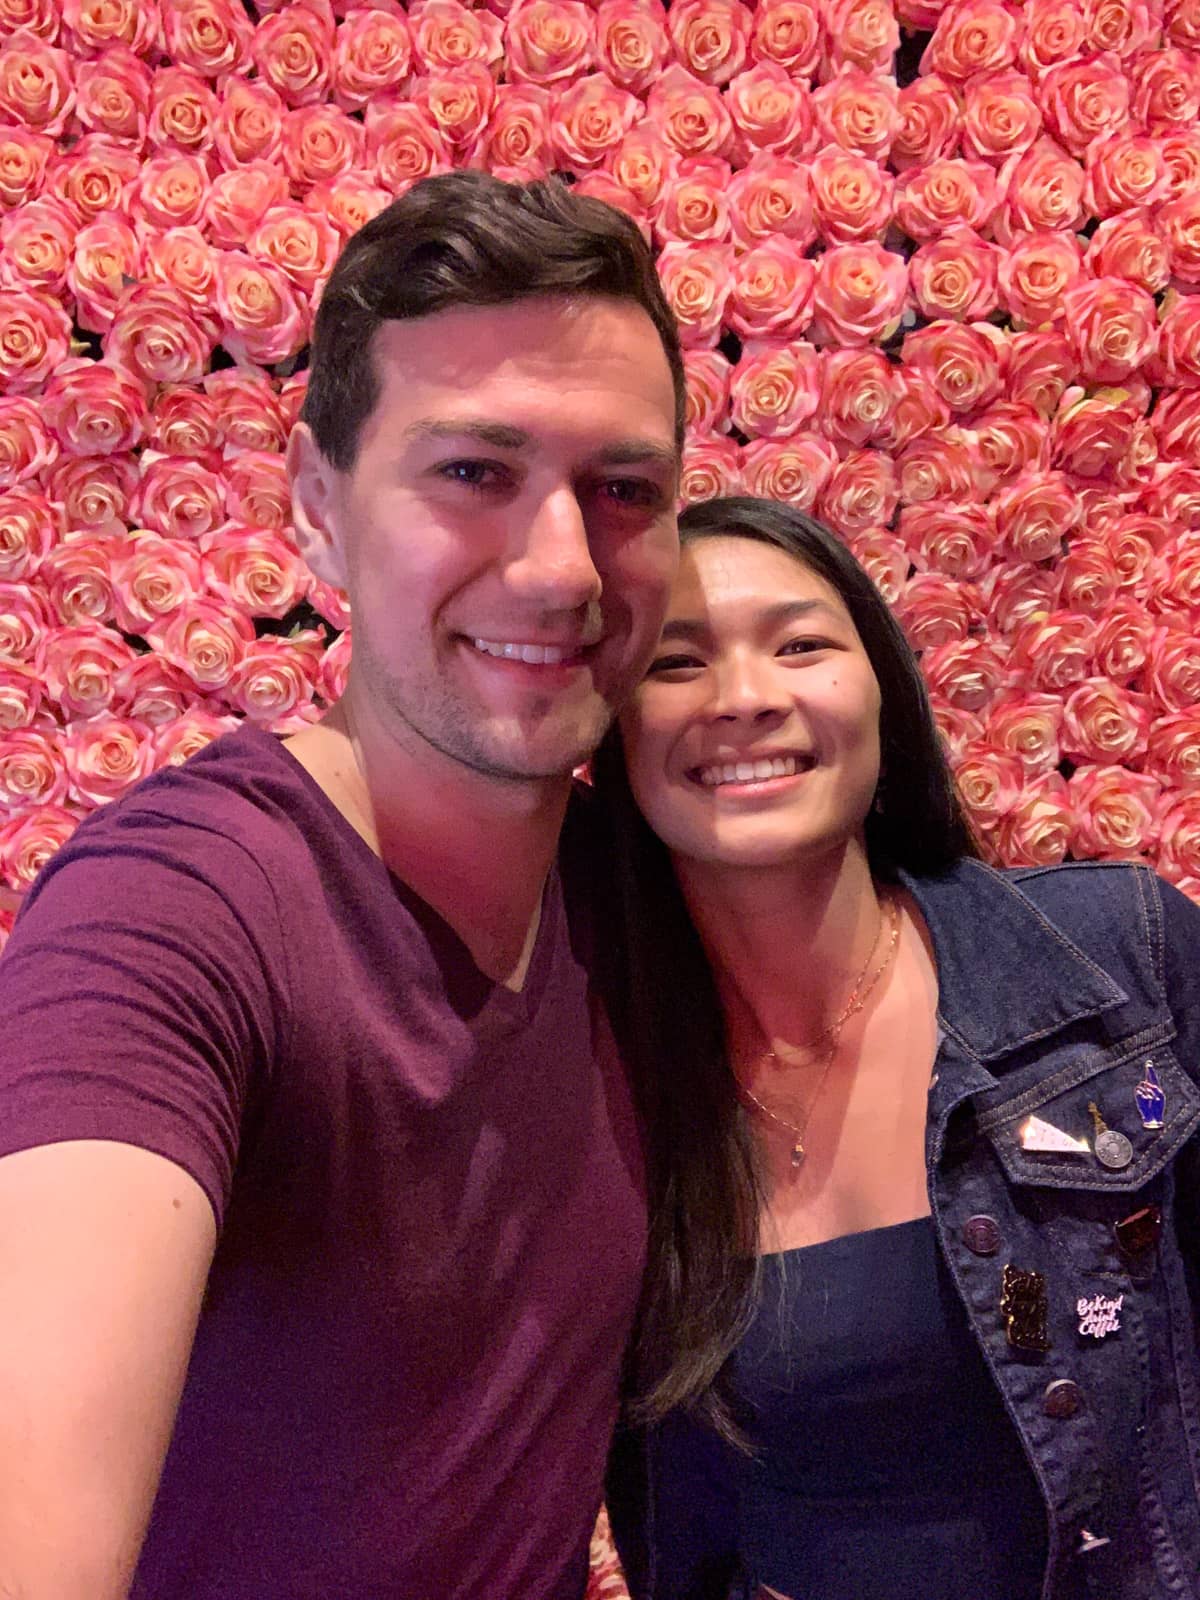 A selfie of a man and woman in front of a backdrop of a makeshift wall of roses